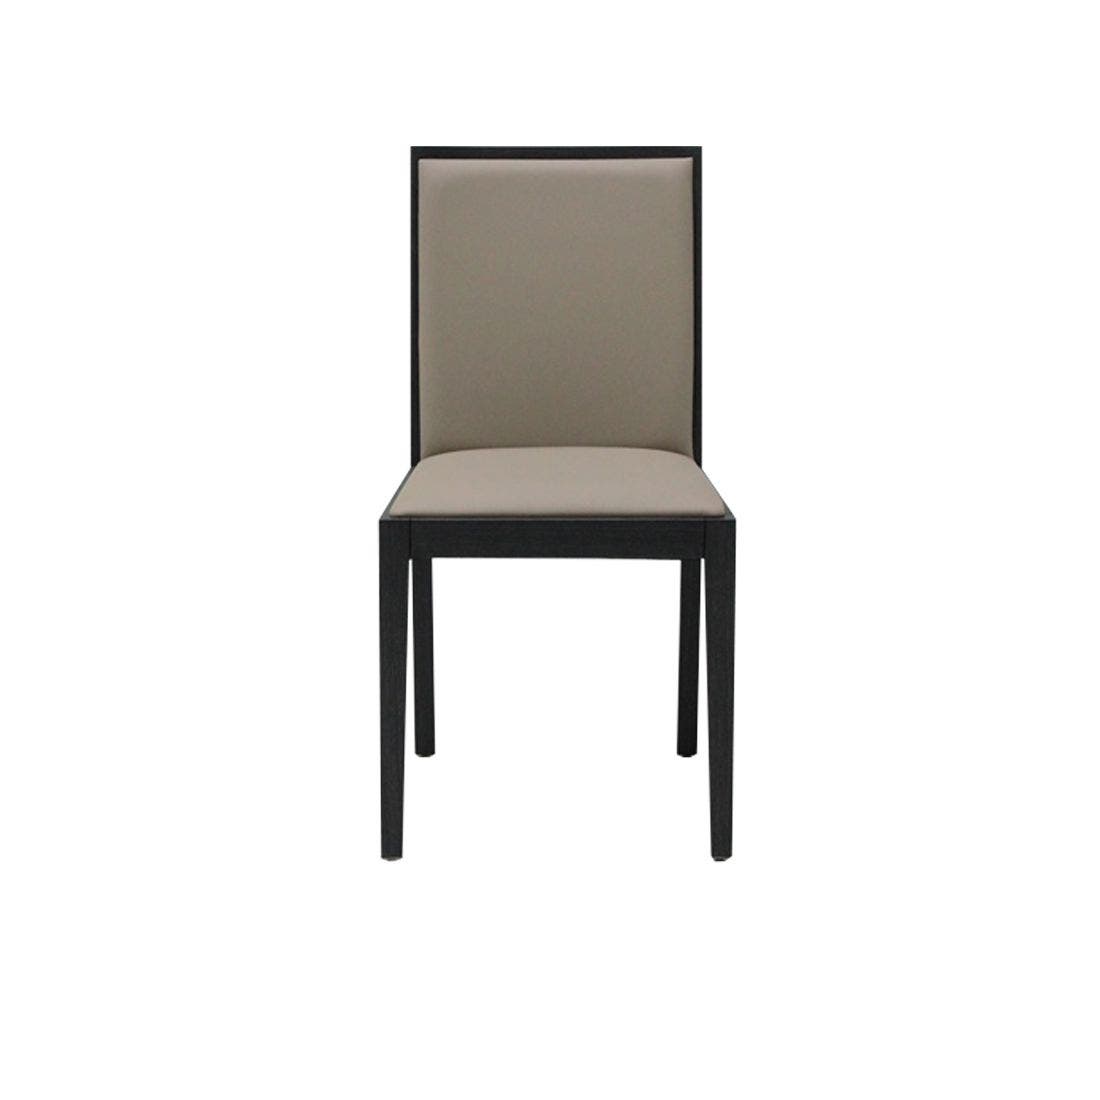 19203177-wenson-furniture-dining-room-chairs-01